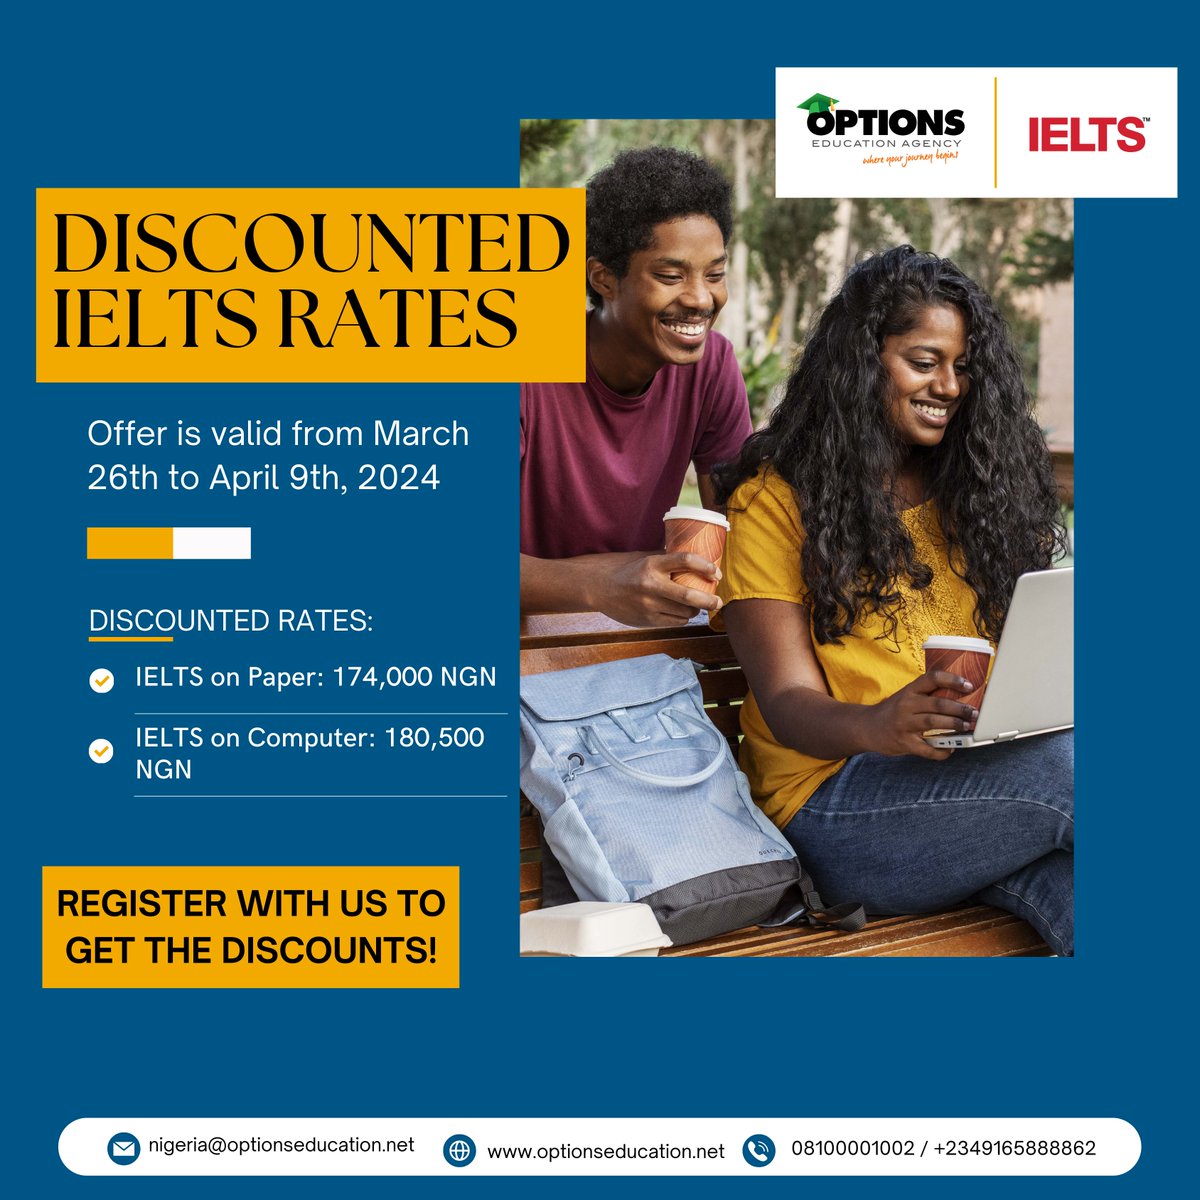 Elevate your future with Options Education Agency's exclusive promo! From March 26th to April 9th, enjoy discounted rates on IELTS exams. Register through 08100001002 to seize this incredible opportunity! #studyabroad